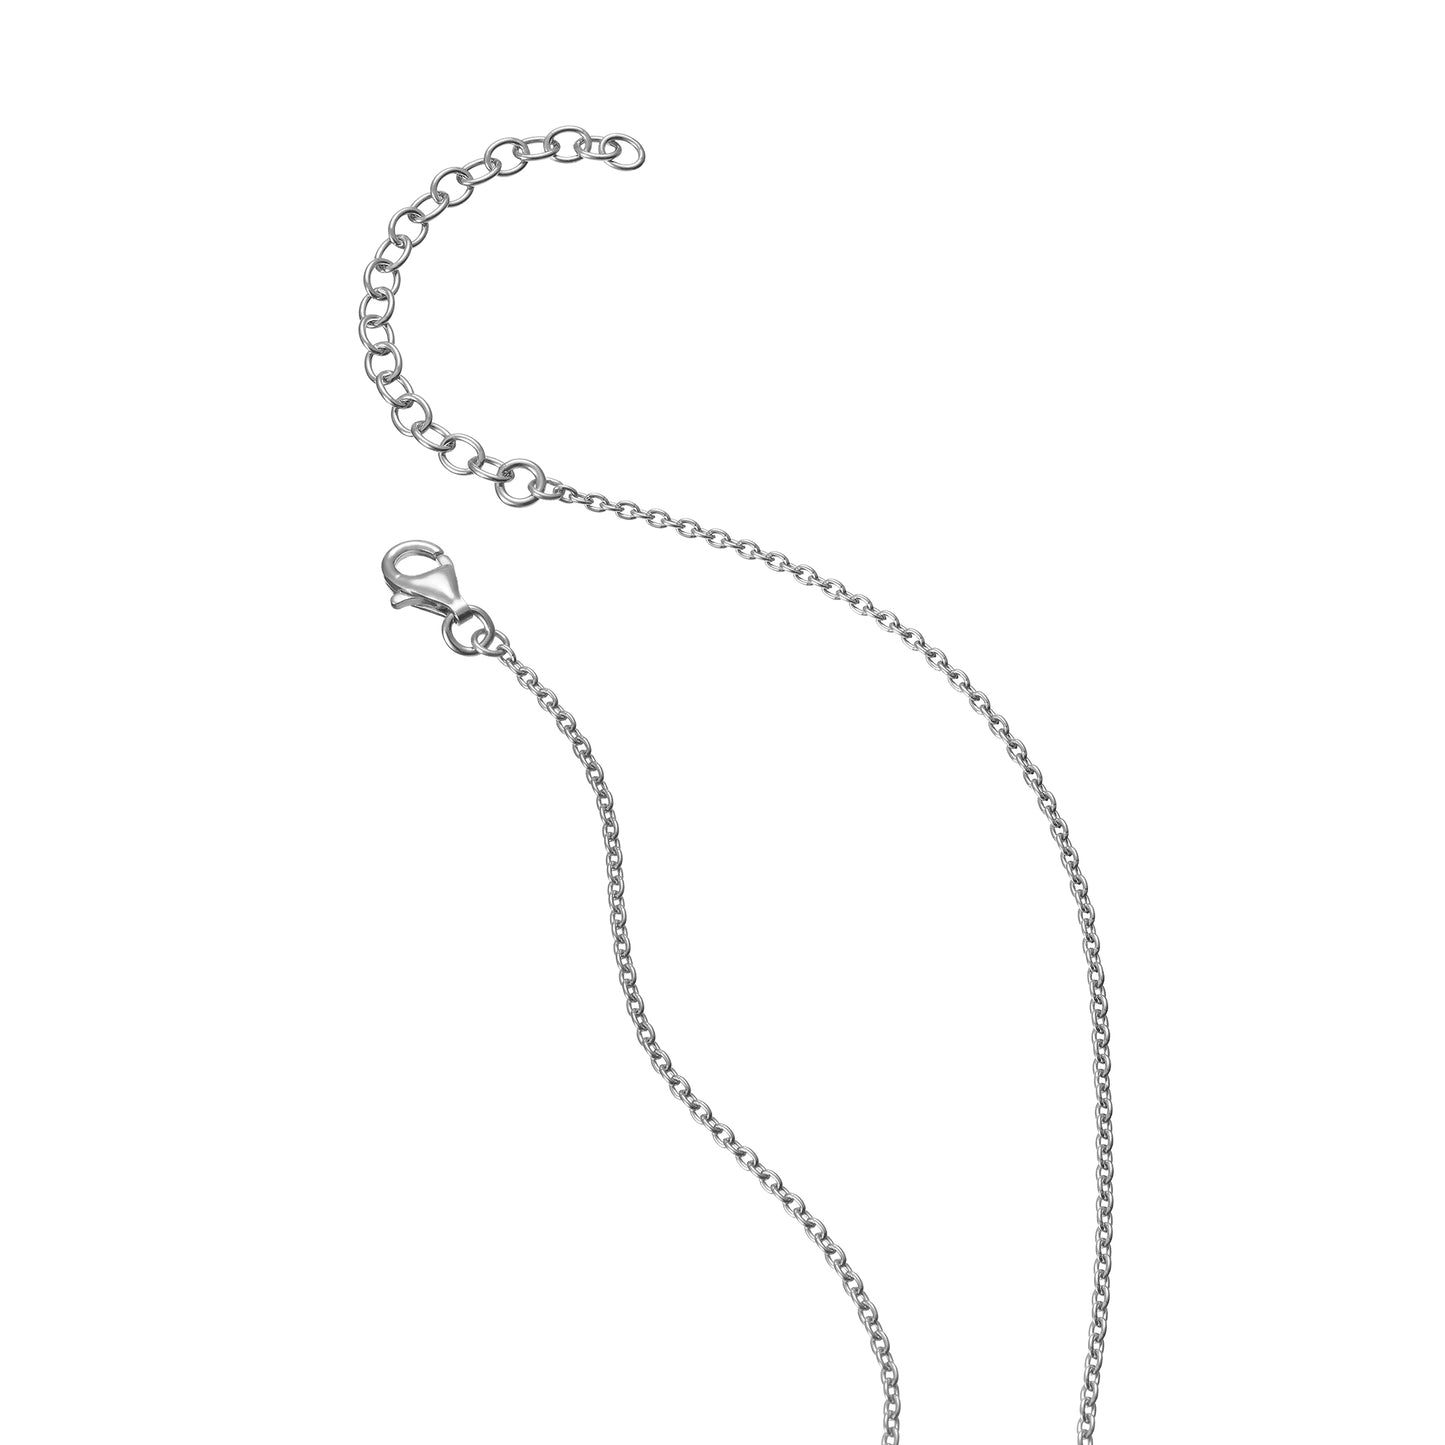 Children's Sterling Silver Extendable Chain Necklace with clasp closure